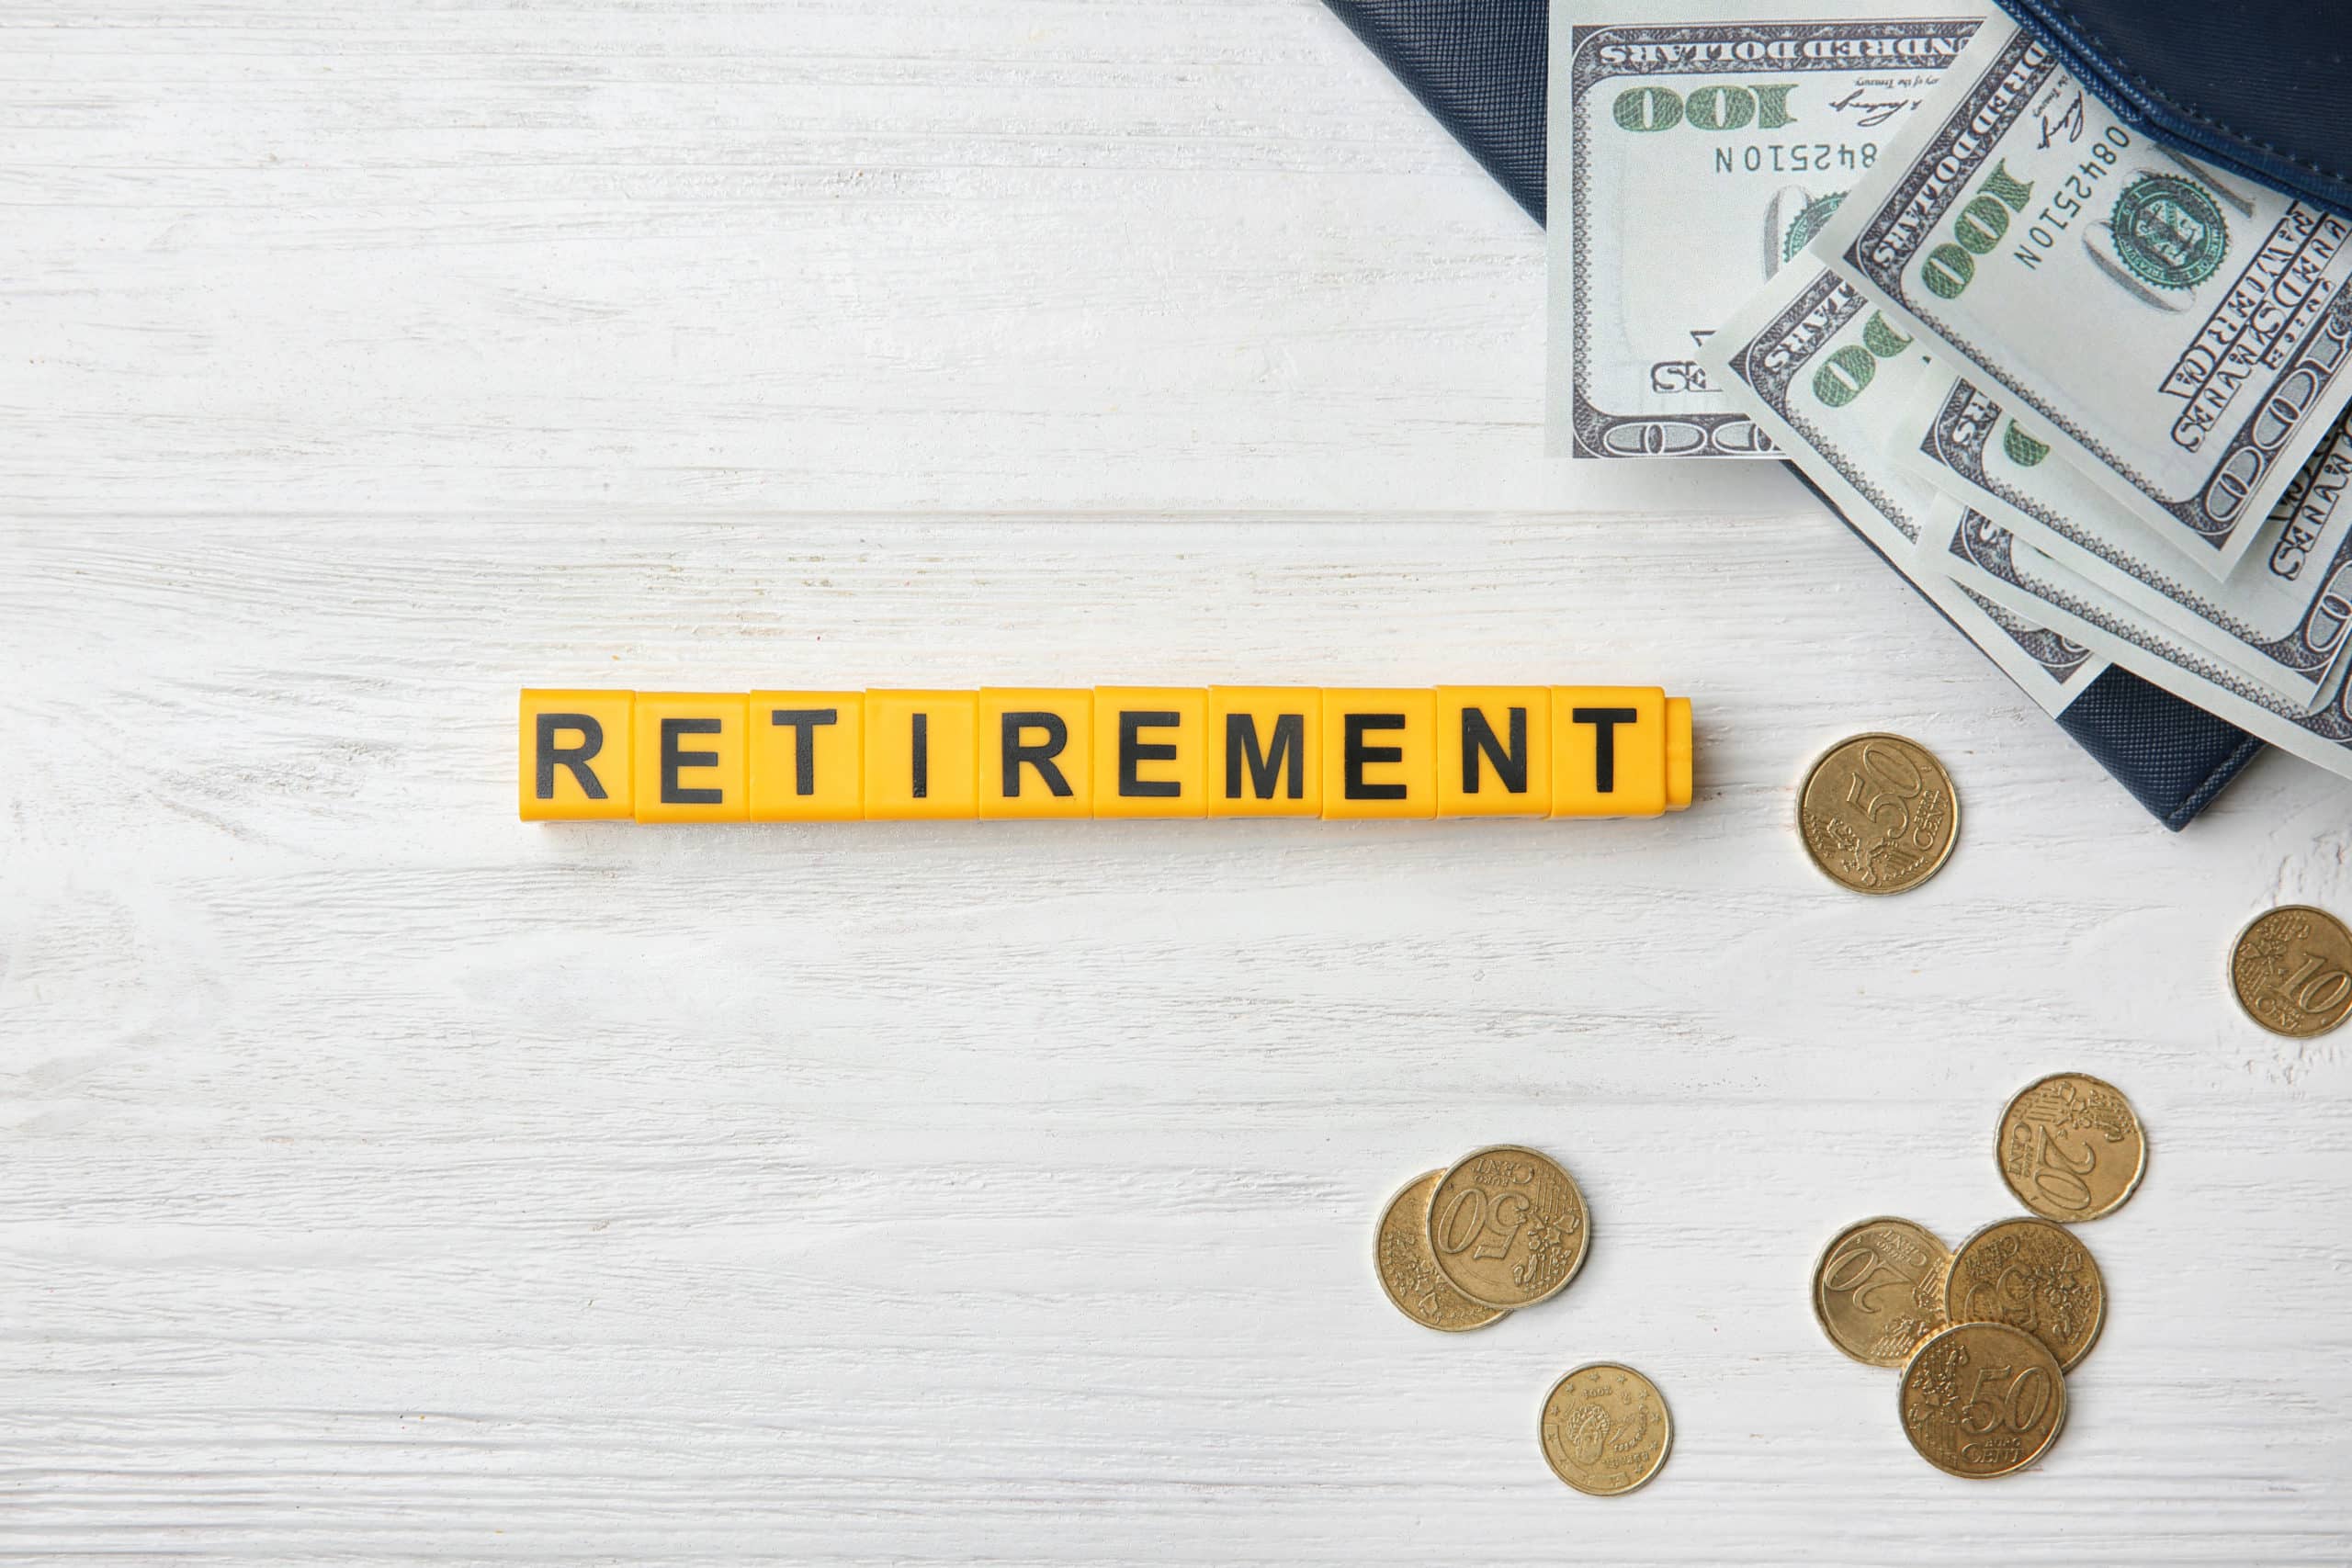 Word "Retirement" and money on light background. Pension planning